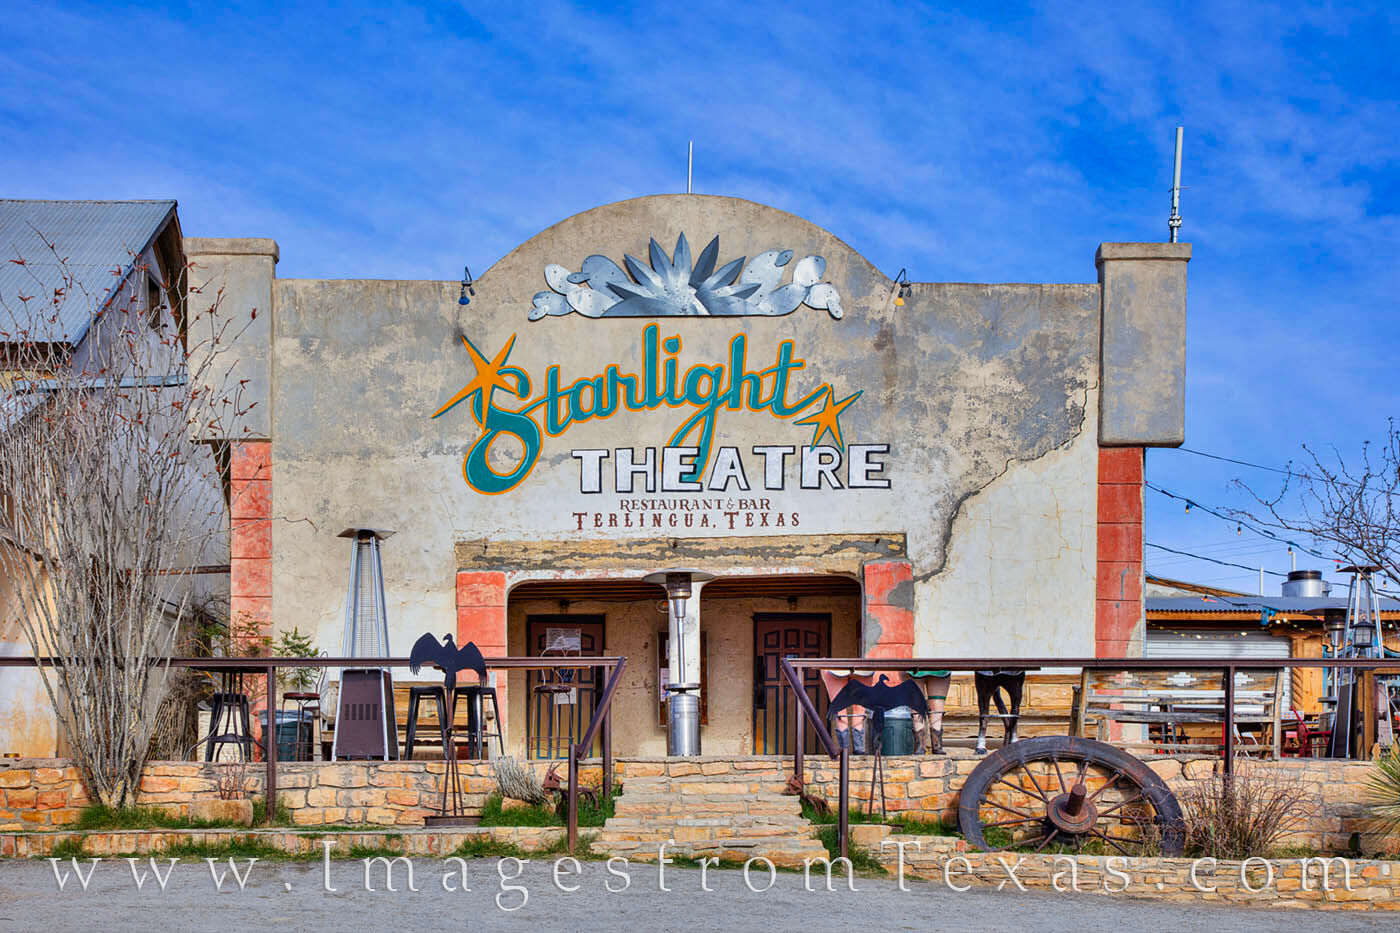 As one of the local iconic eateries in Terligua, the Starlight Theater is open evenings and serves great food and offers tasty...